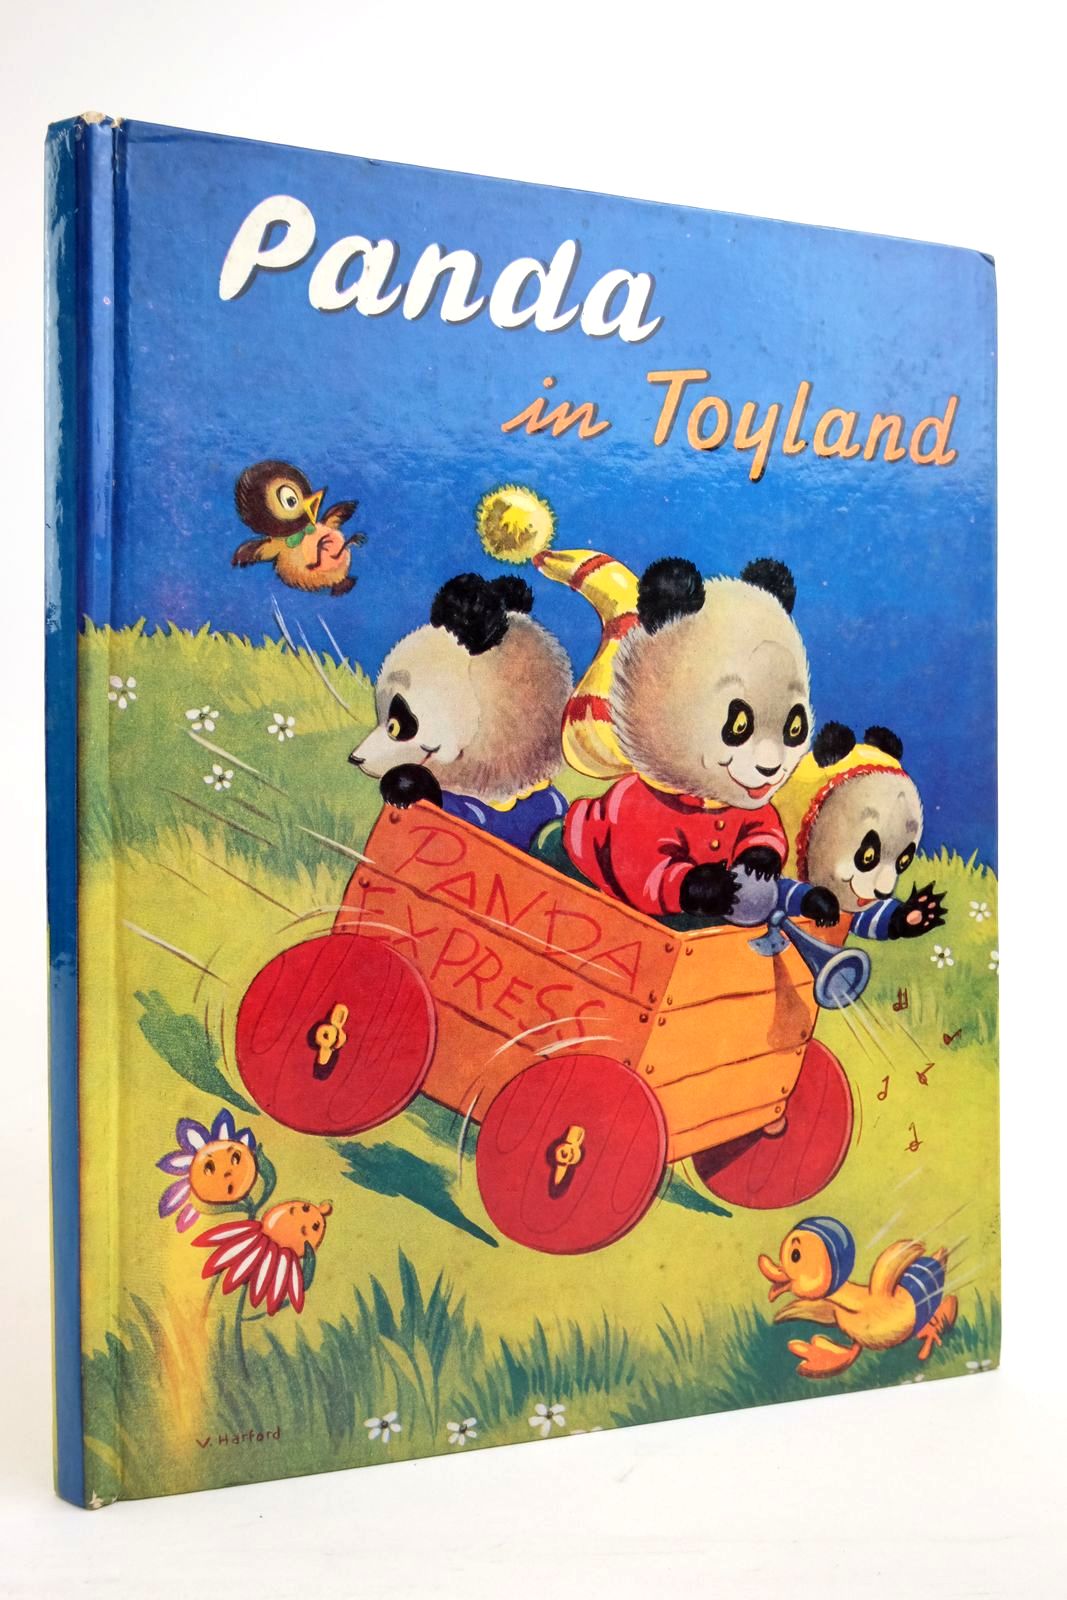 Photo of PANDA IN TOYLAND illustrated by Harford, Violet published by Juvenile Productions Ltd. (STOCK CODE: 2136245)  for sale by Stella & Rose's Books